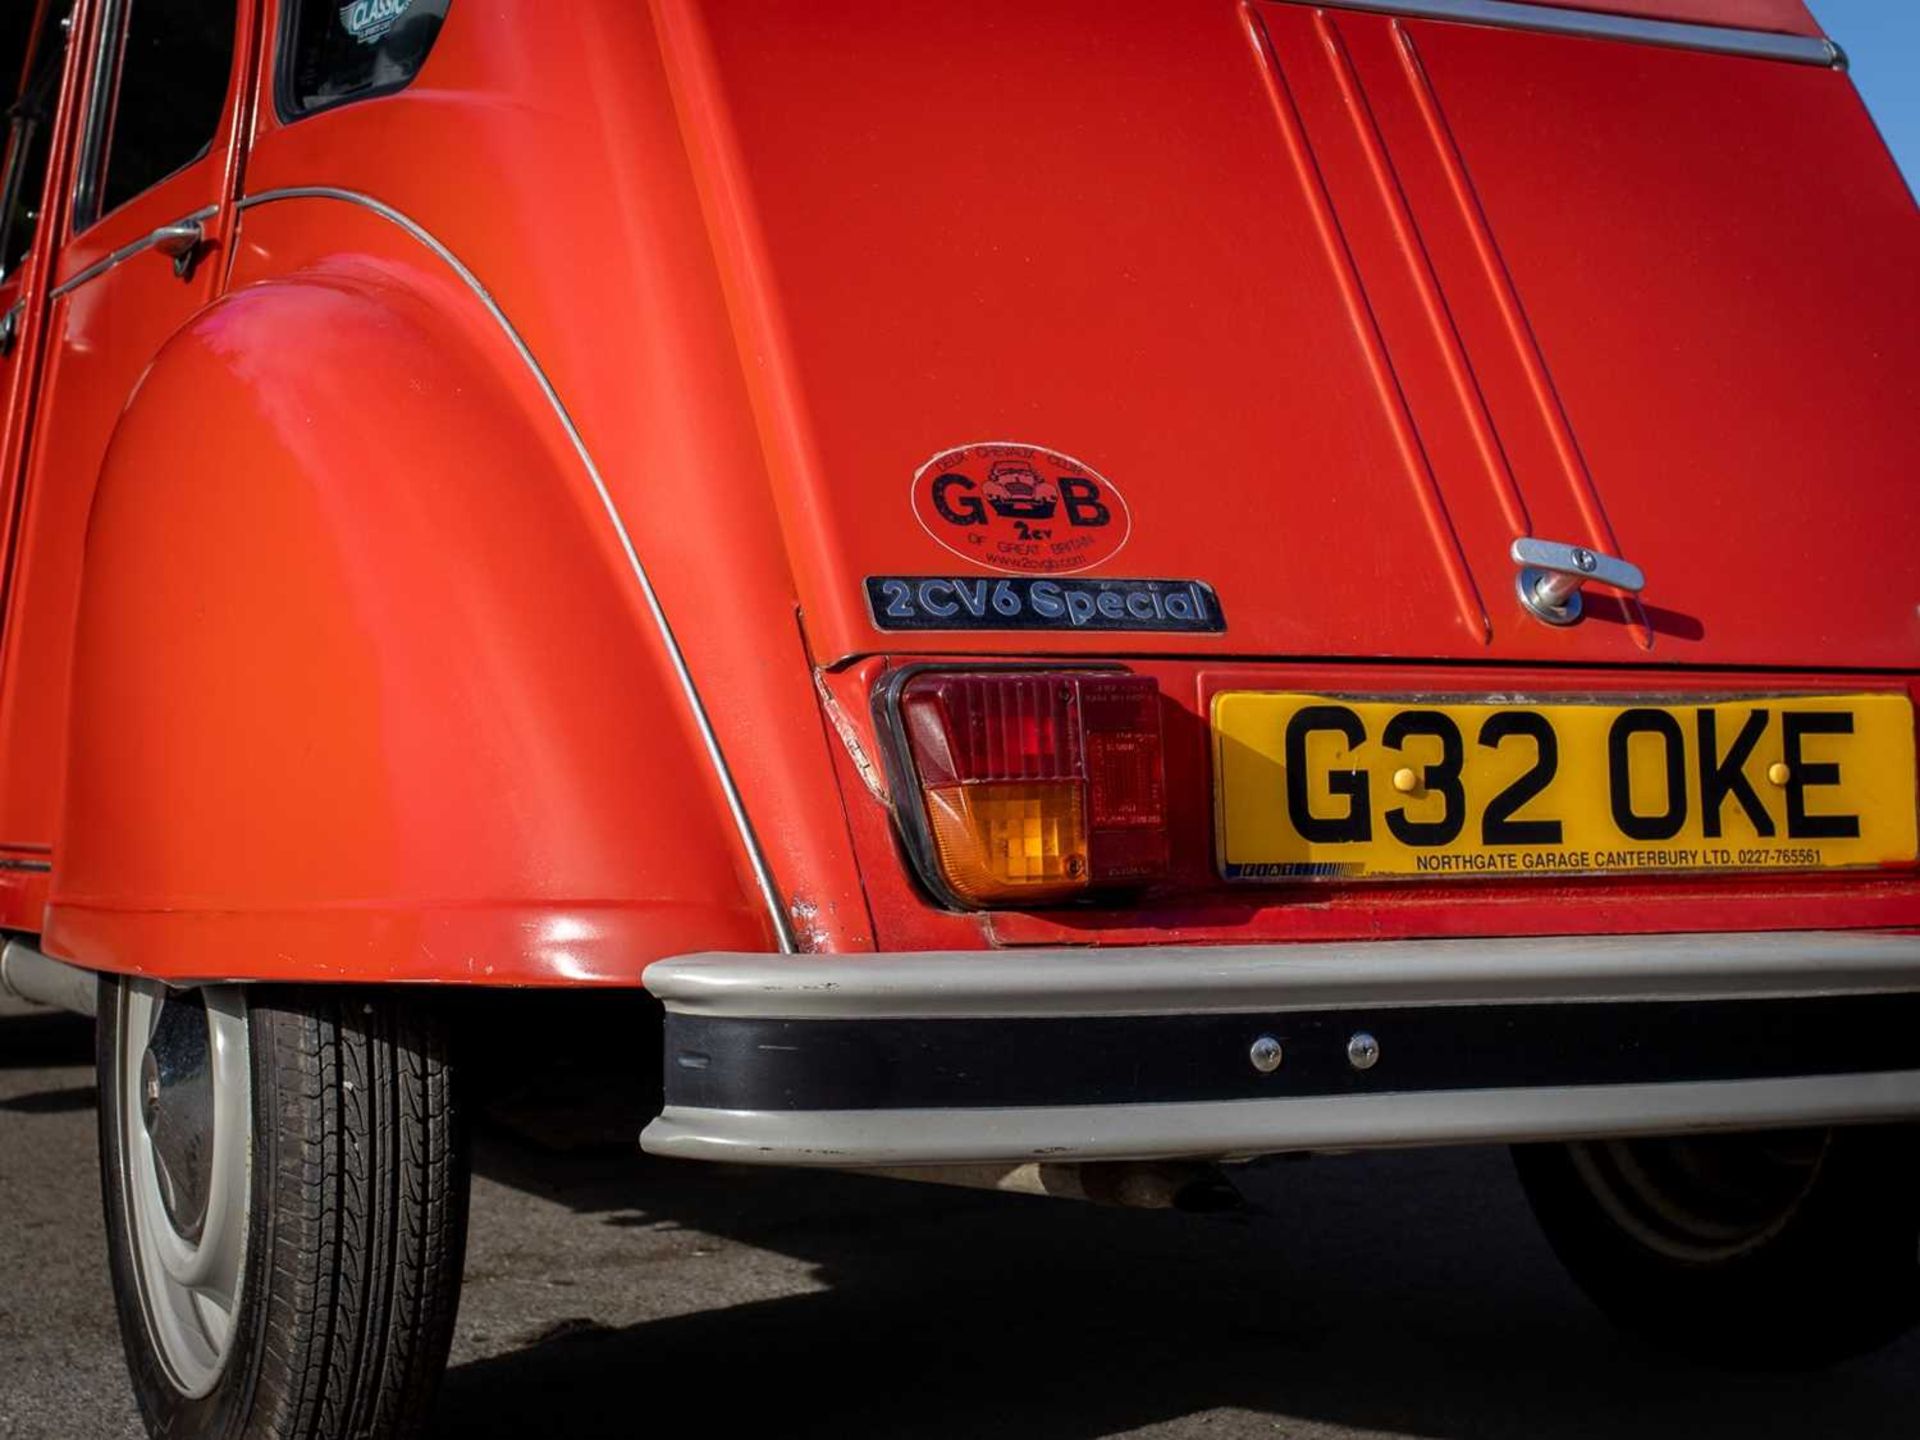 1989 Citroën 2CV6 Spécial Believed to have covered a credible 15,000 miles - Image 103 of 113